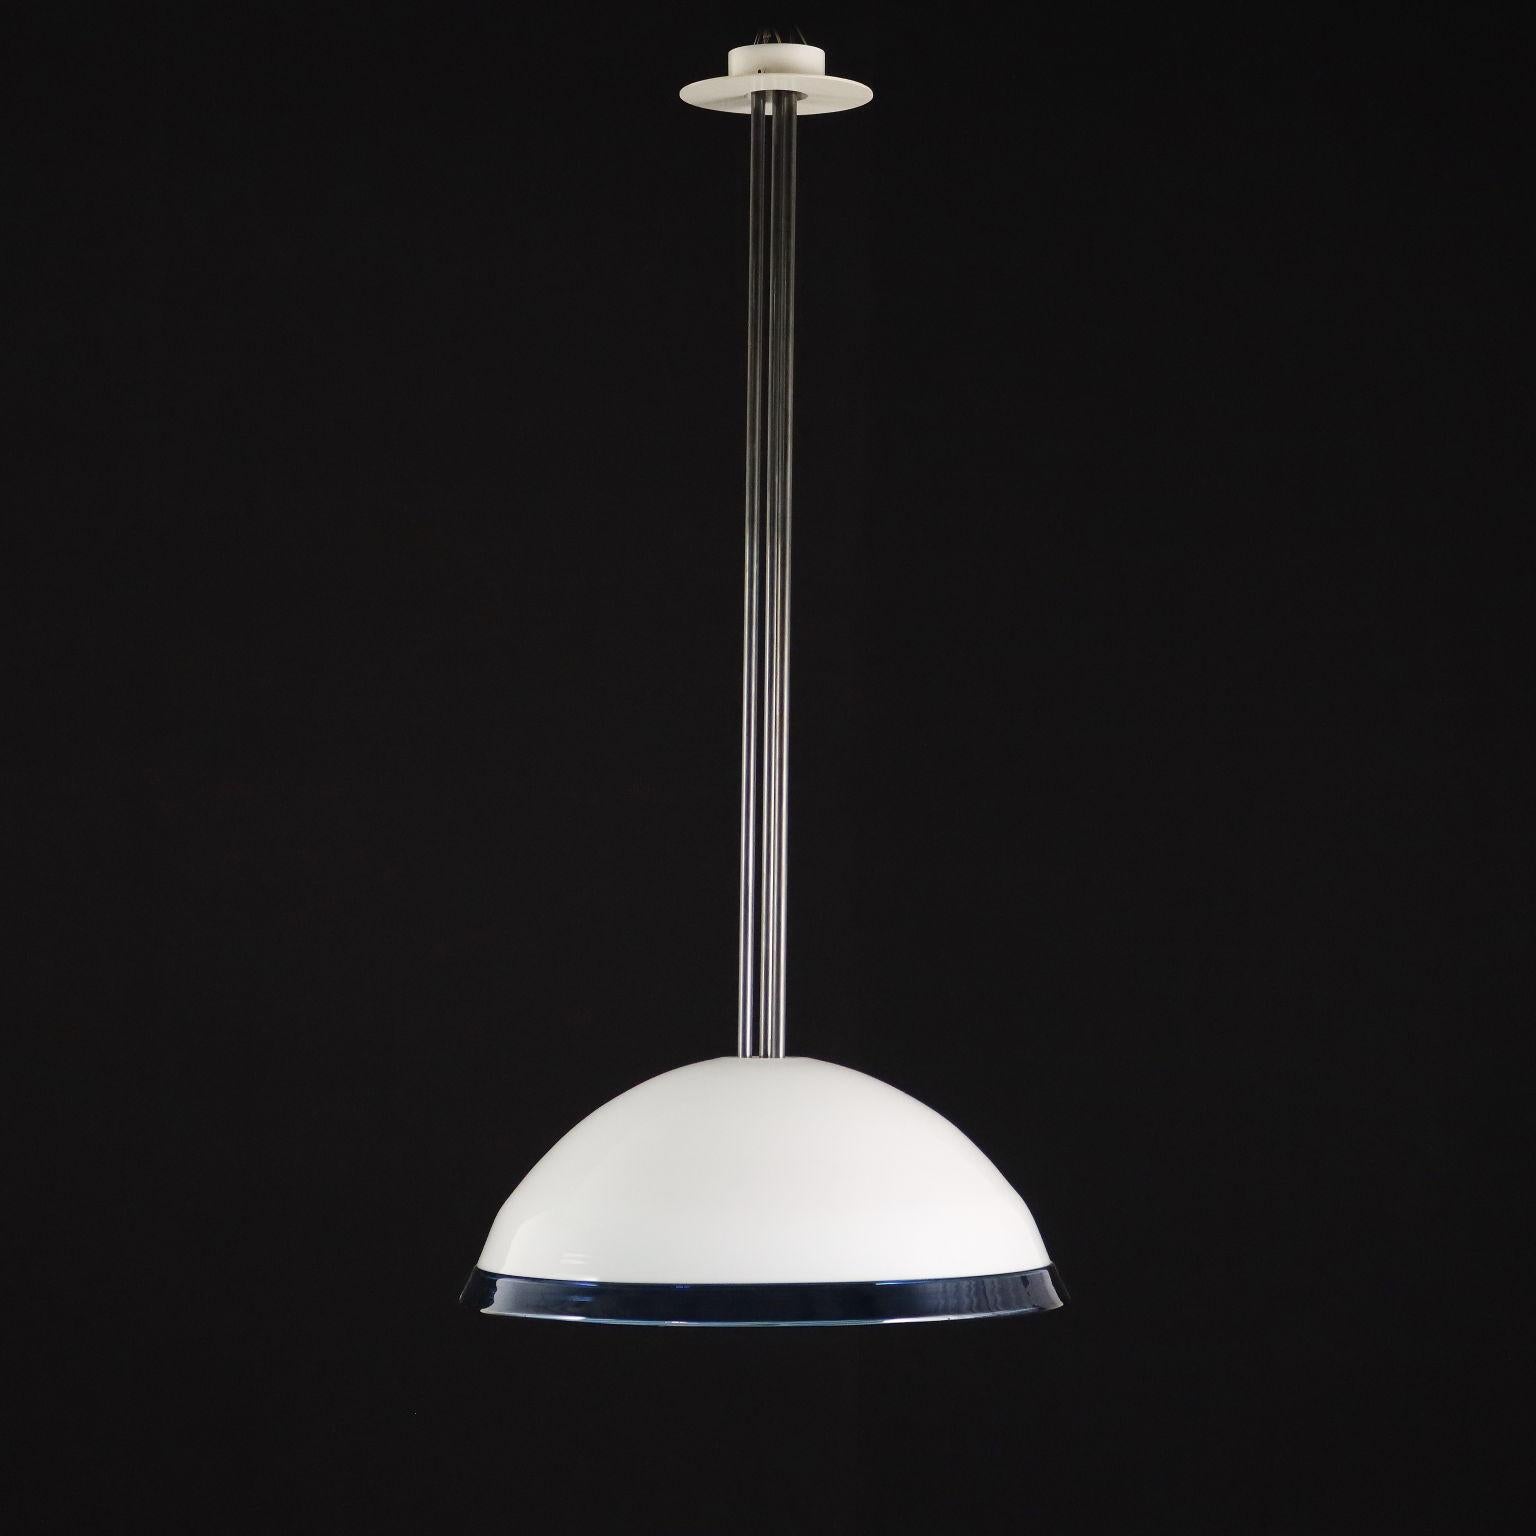 Enamelled metal ceiling lamp with Murano glass diffuser.